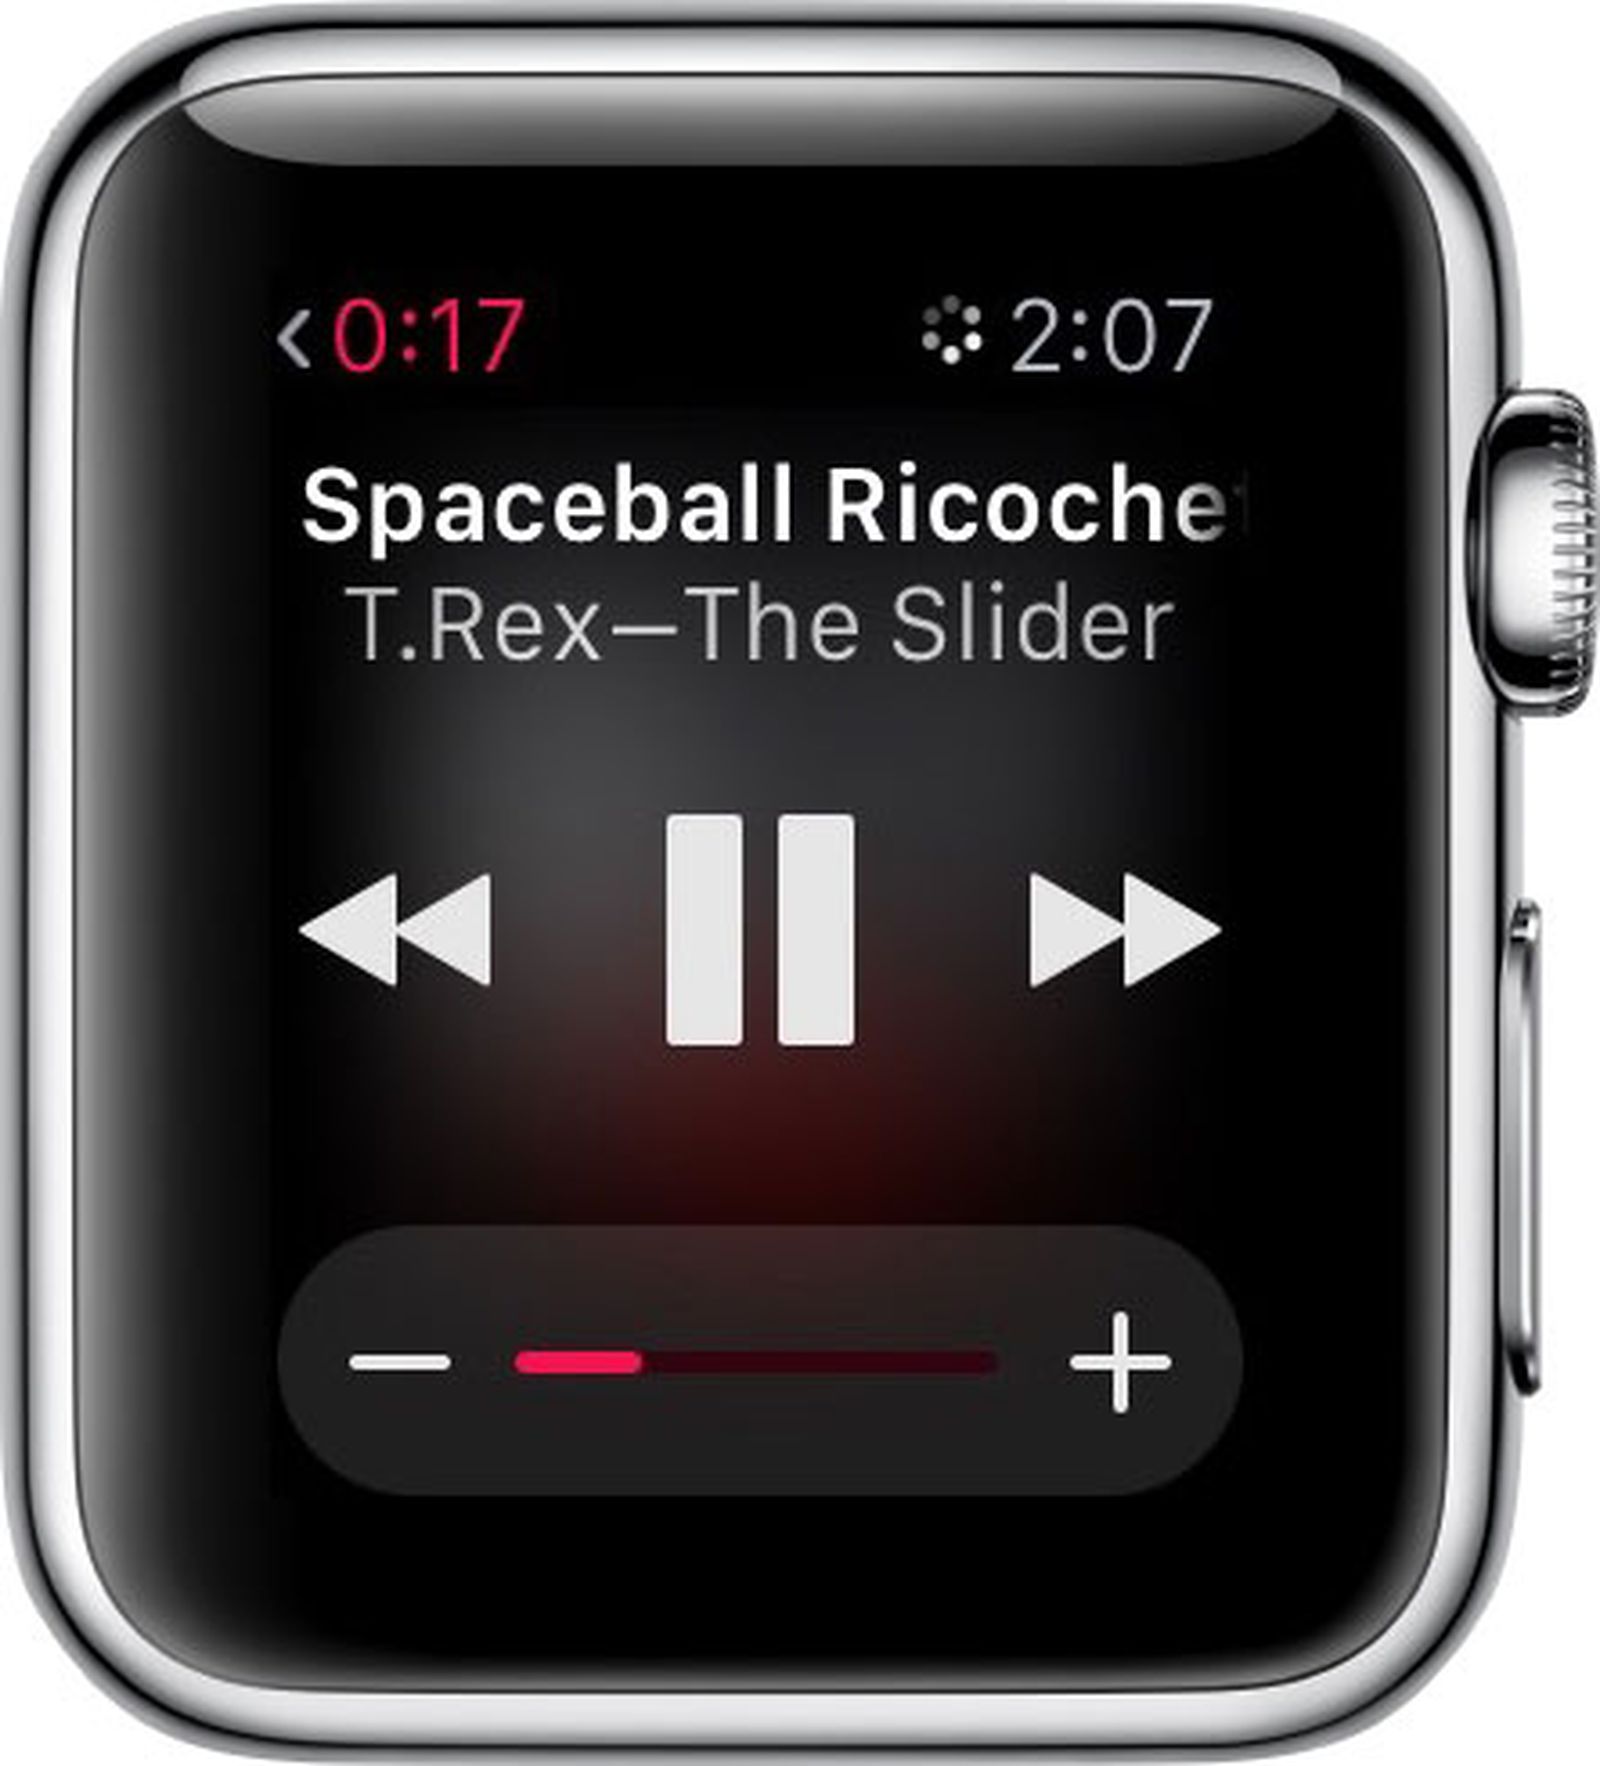 How To Pair Bluetooth Headphones And Listen To Music On Apple Watch Macrumors